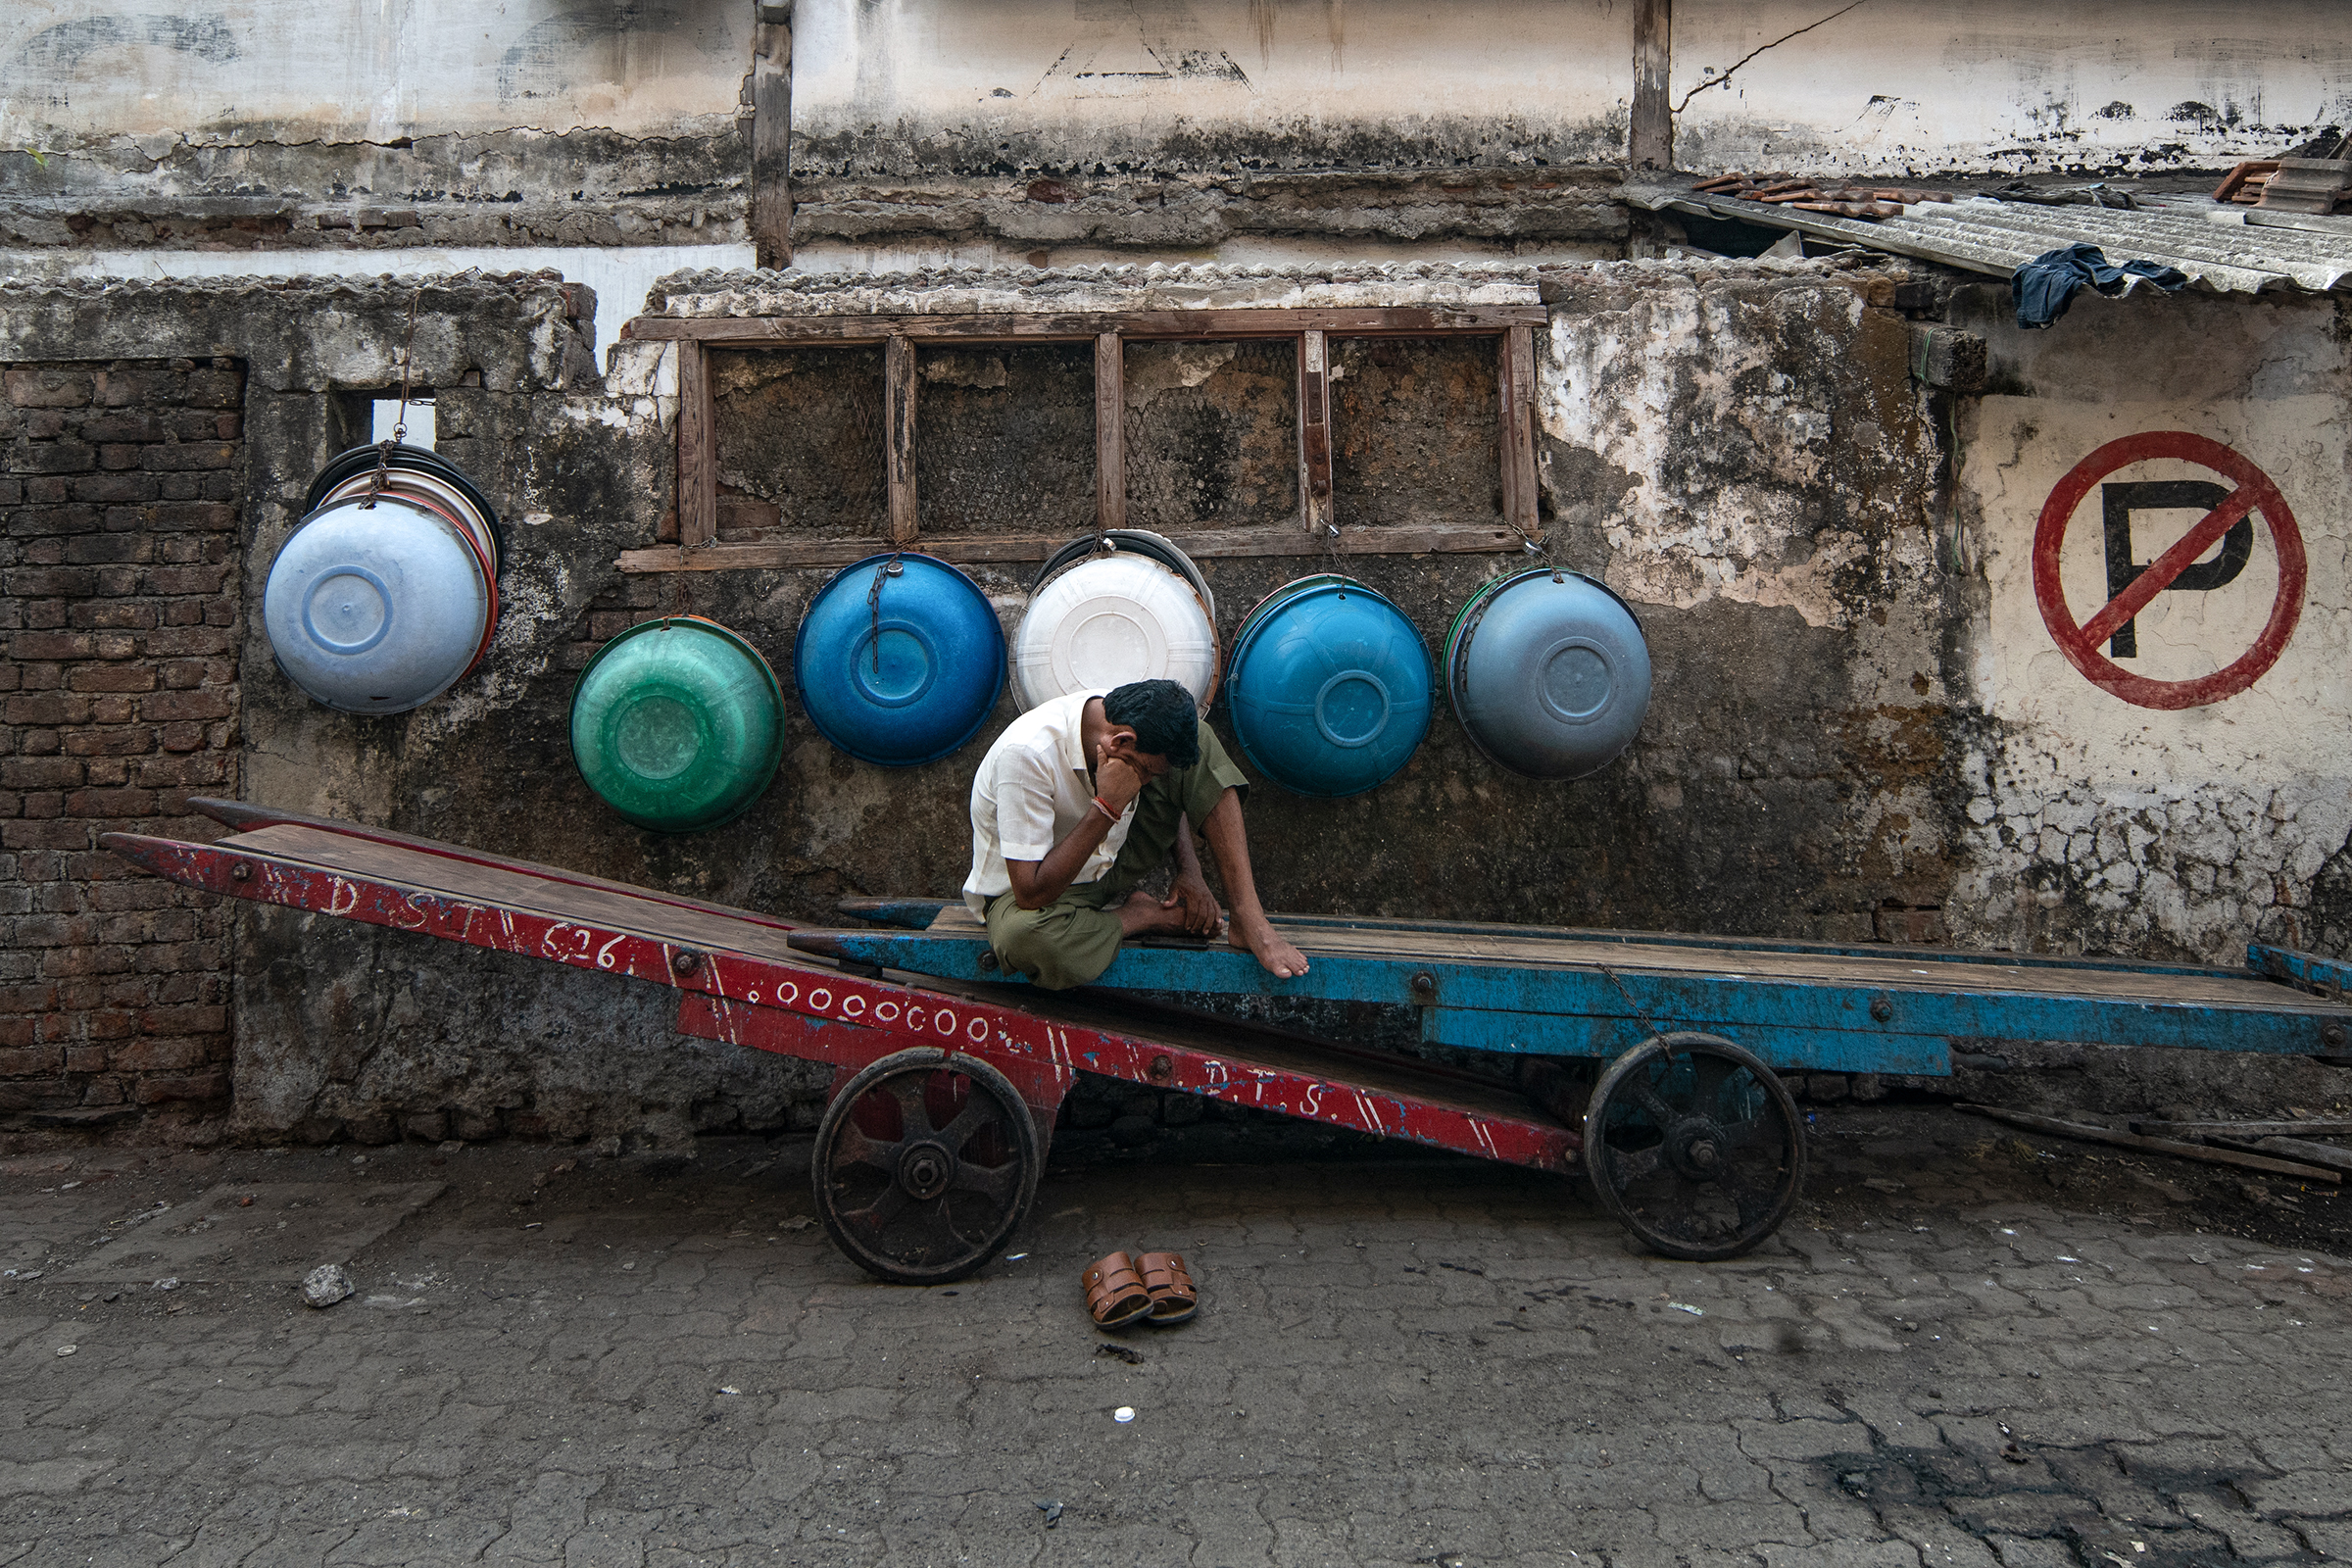 A worker watches his mobile phone while taking a break, in Mumbai on April 17.